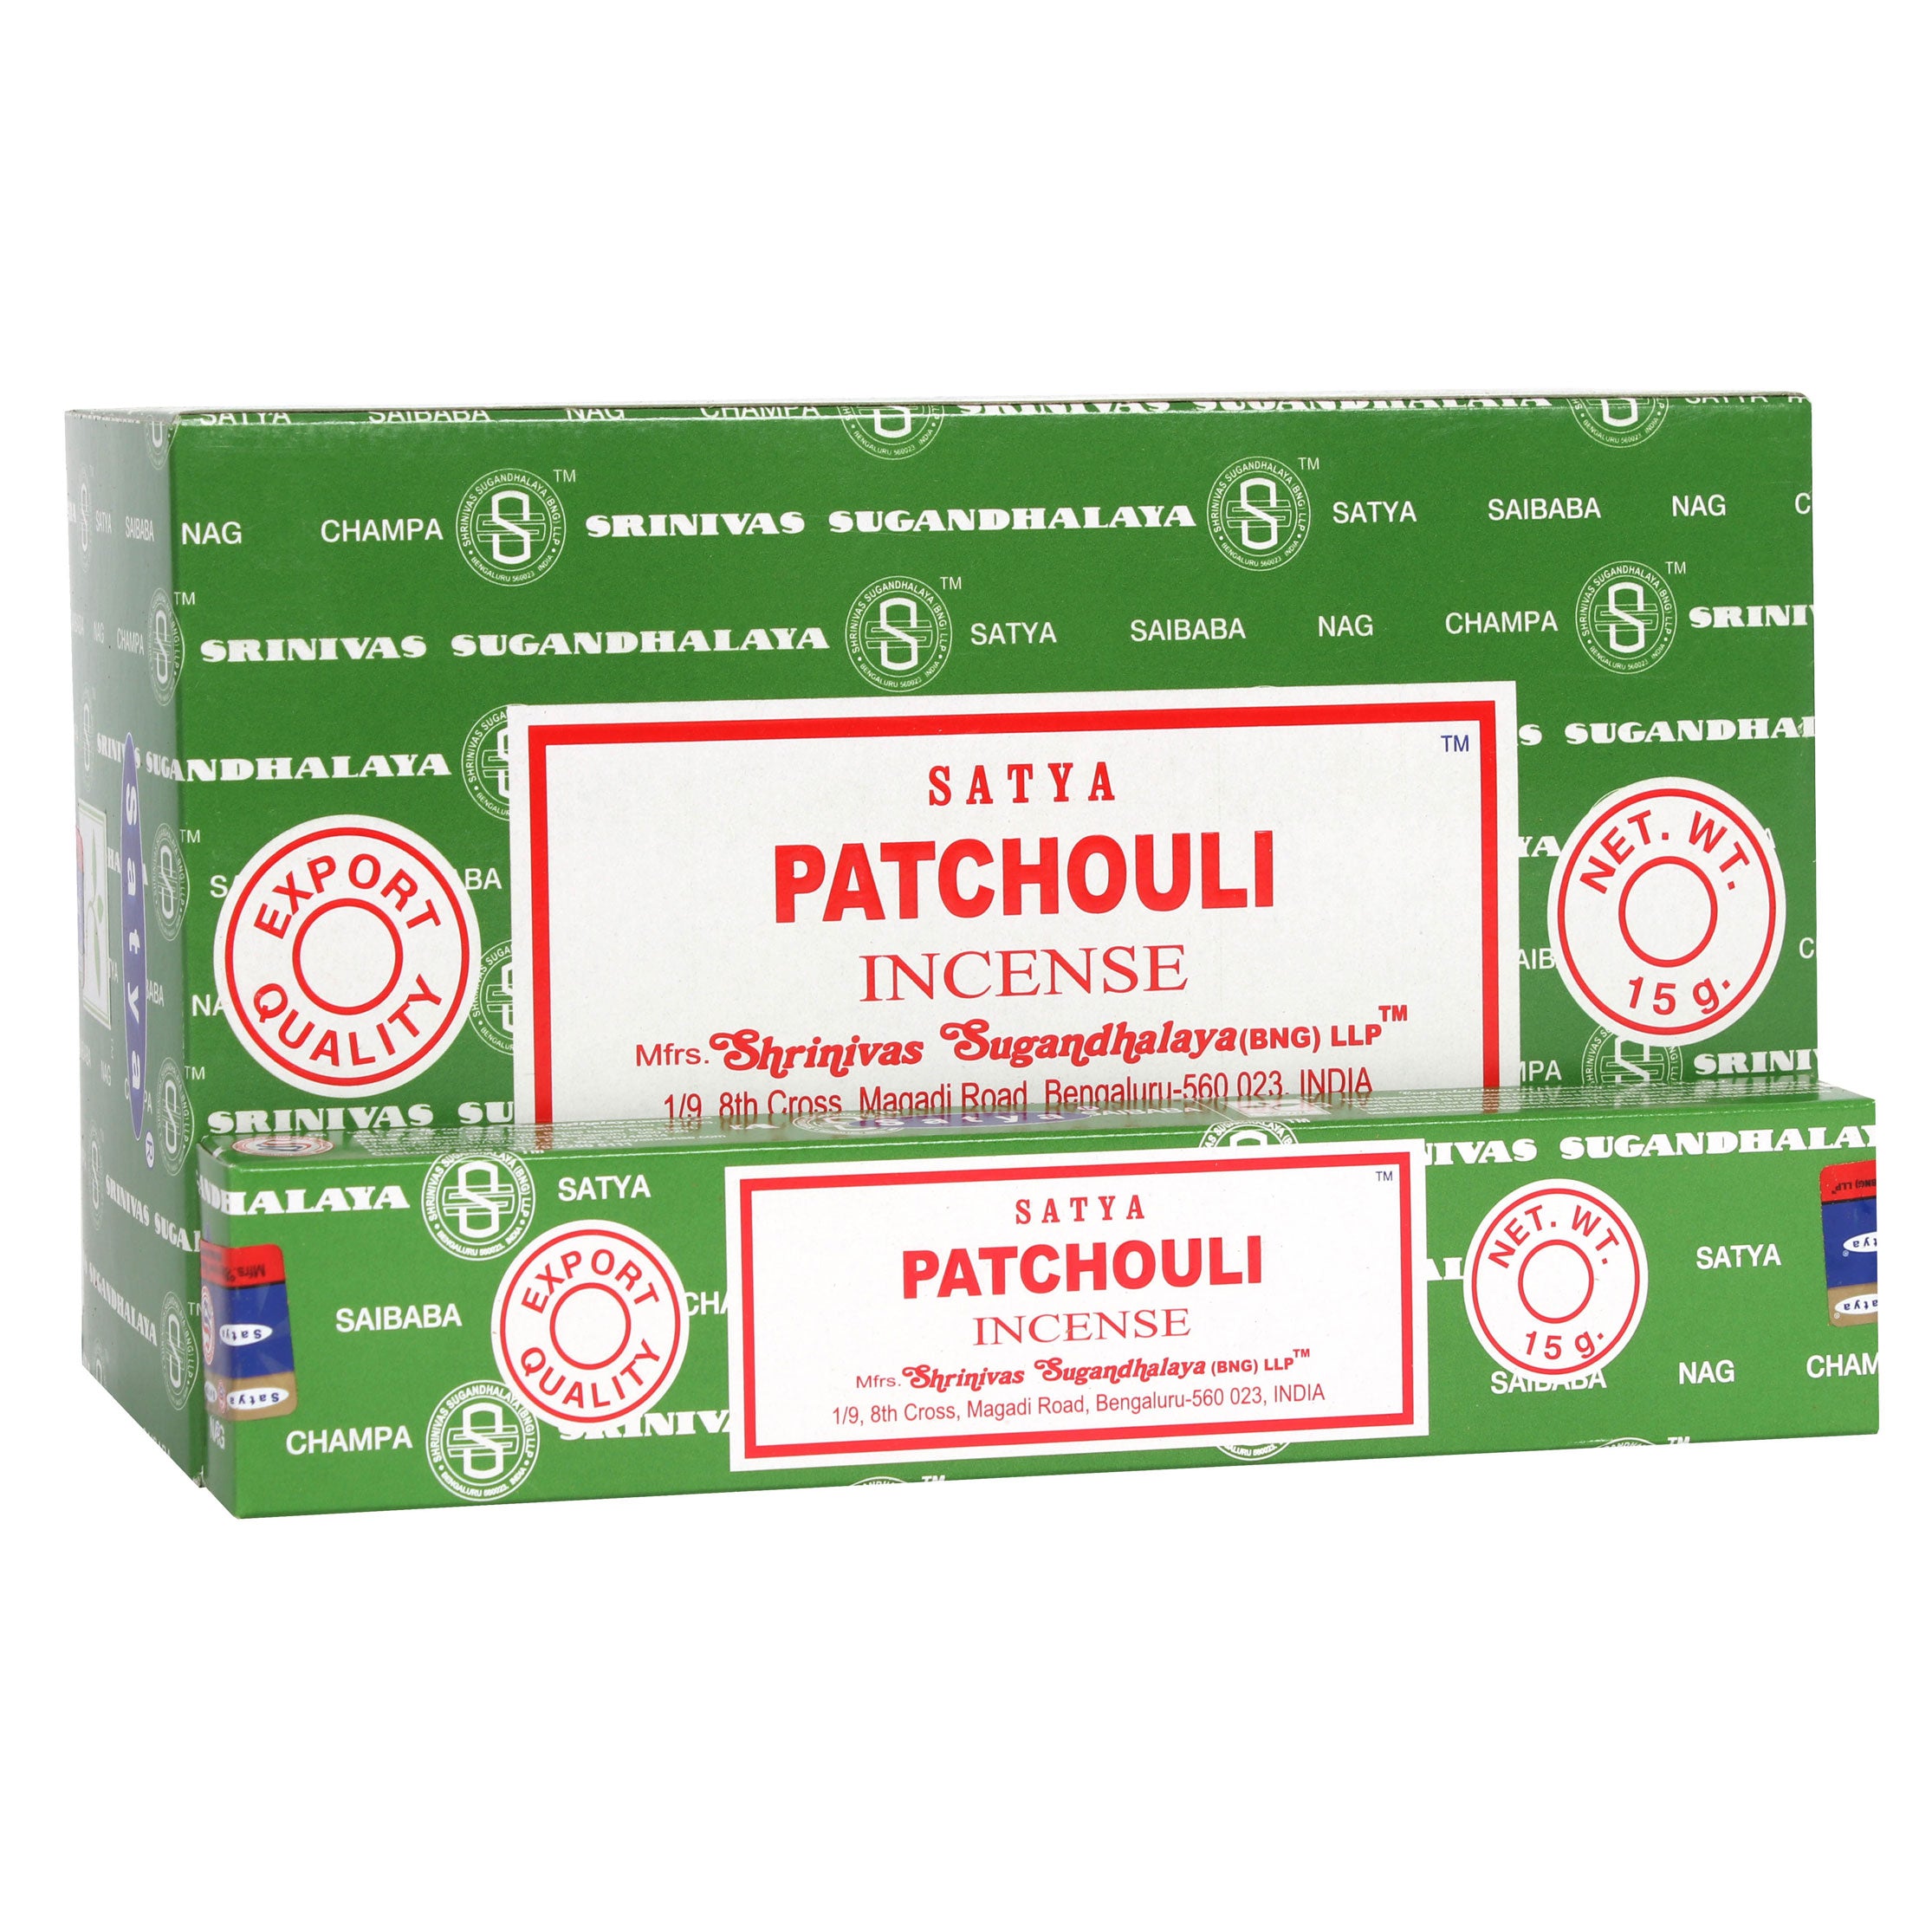 View 12 Packs of Patchouli Forest Incense Sticks by Satya information